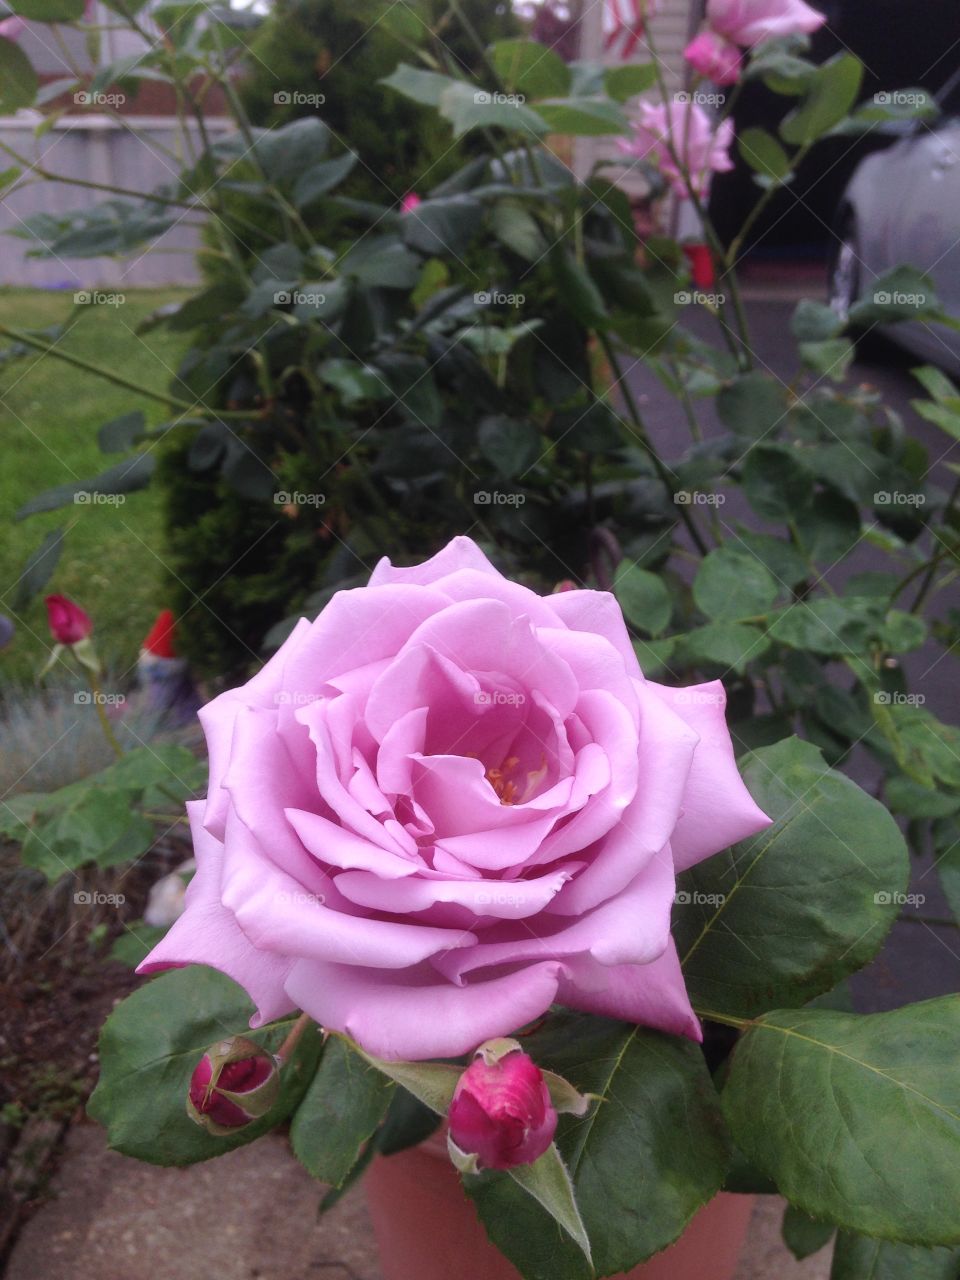 Rose "Blue Girl" . First blooms of 2015 in New York!